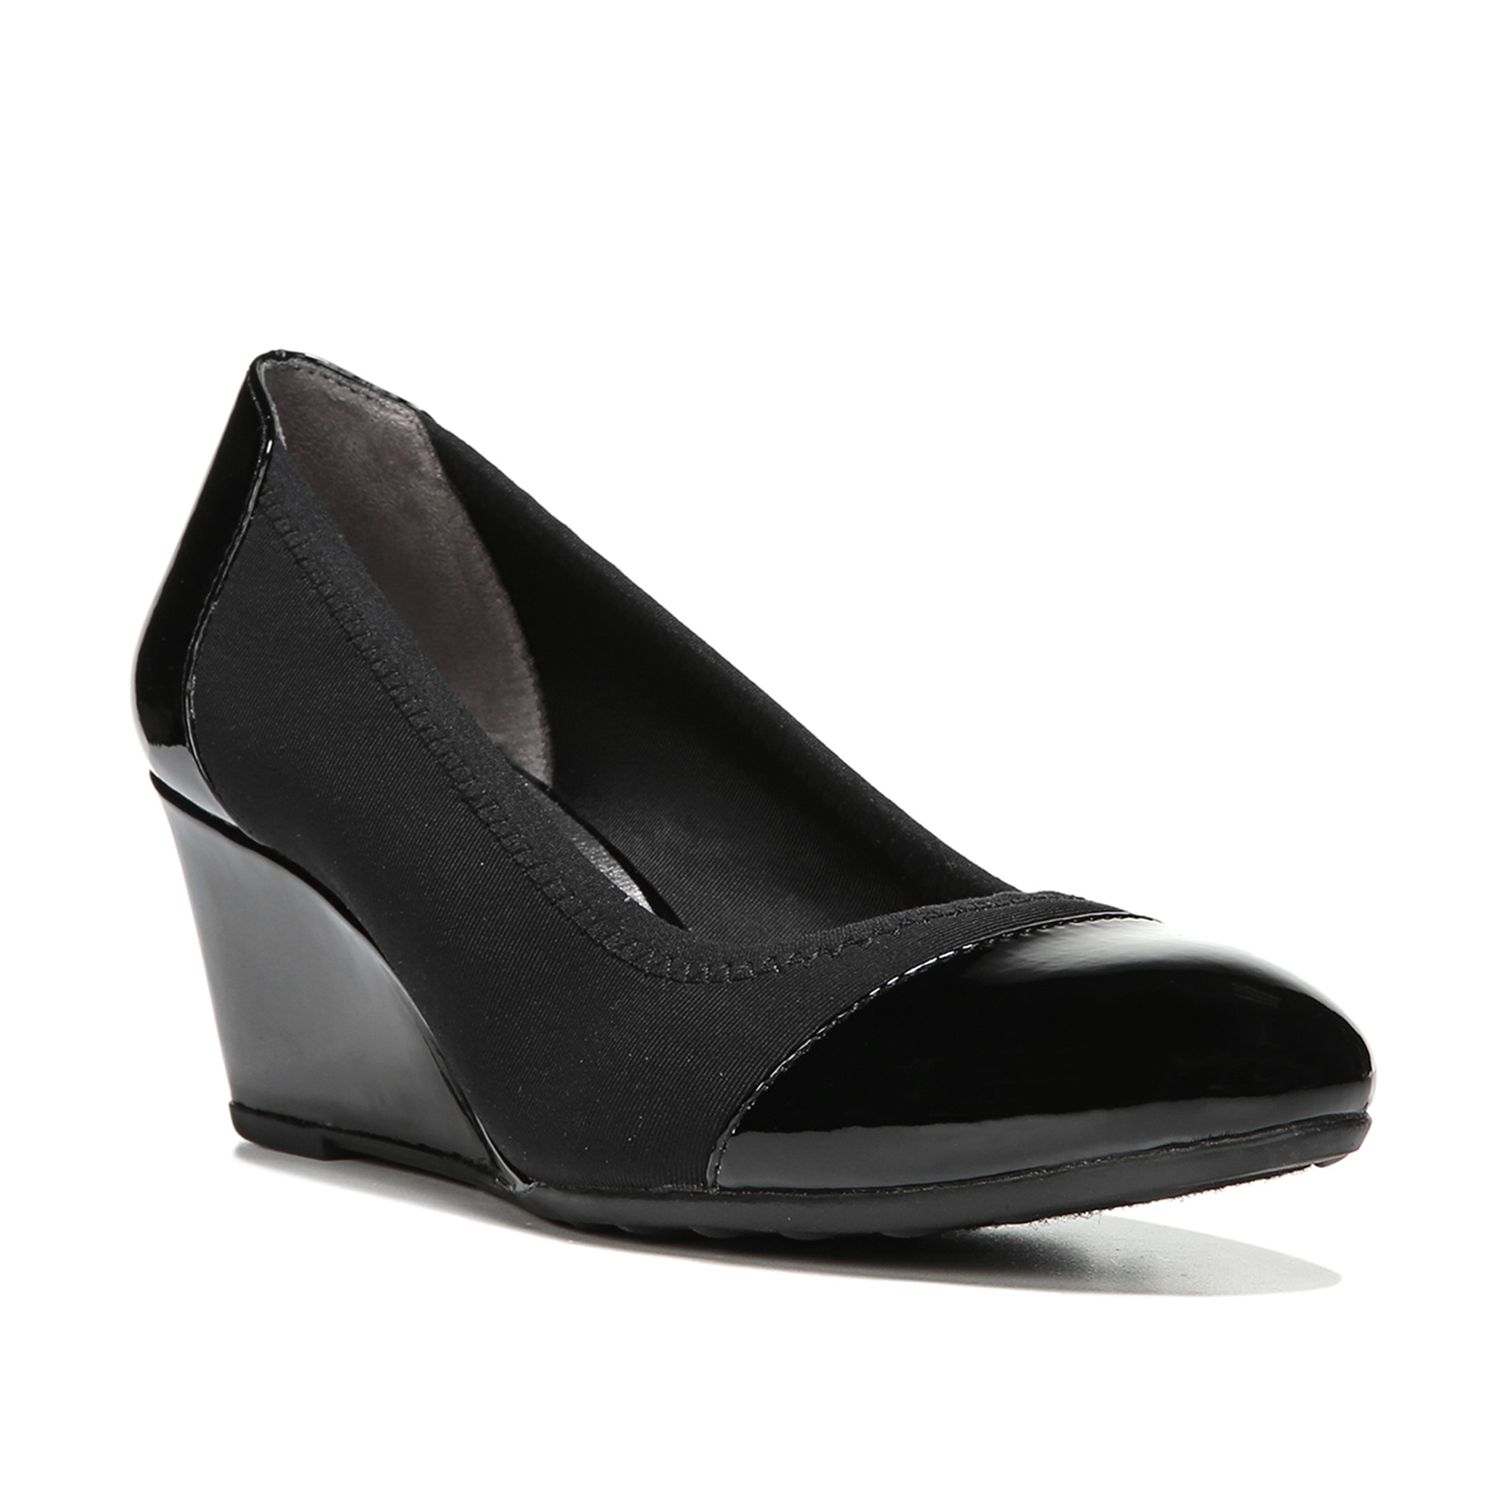 women's wide wedge shoes